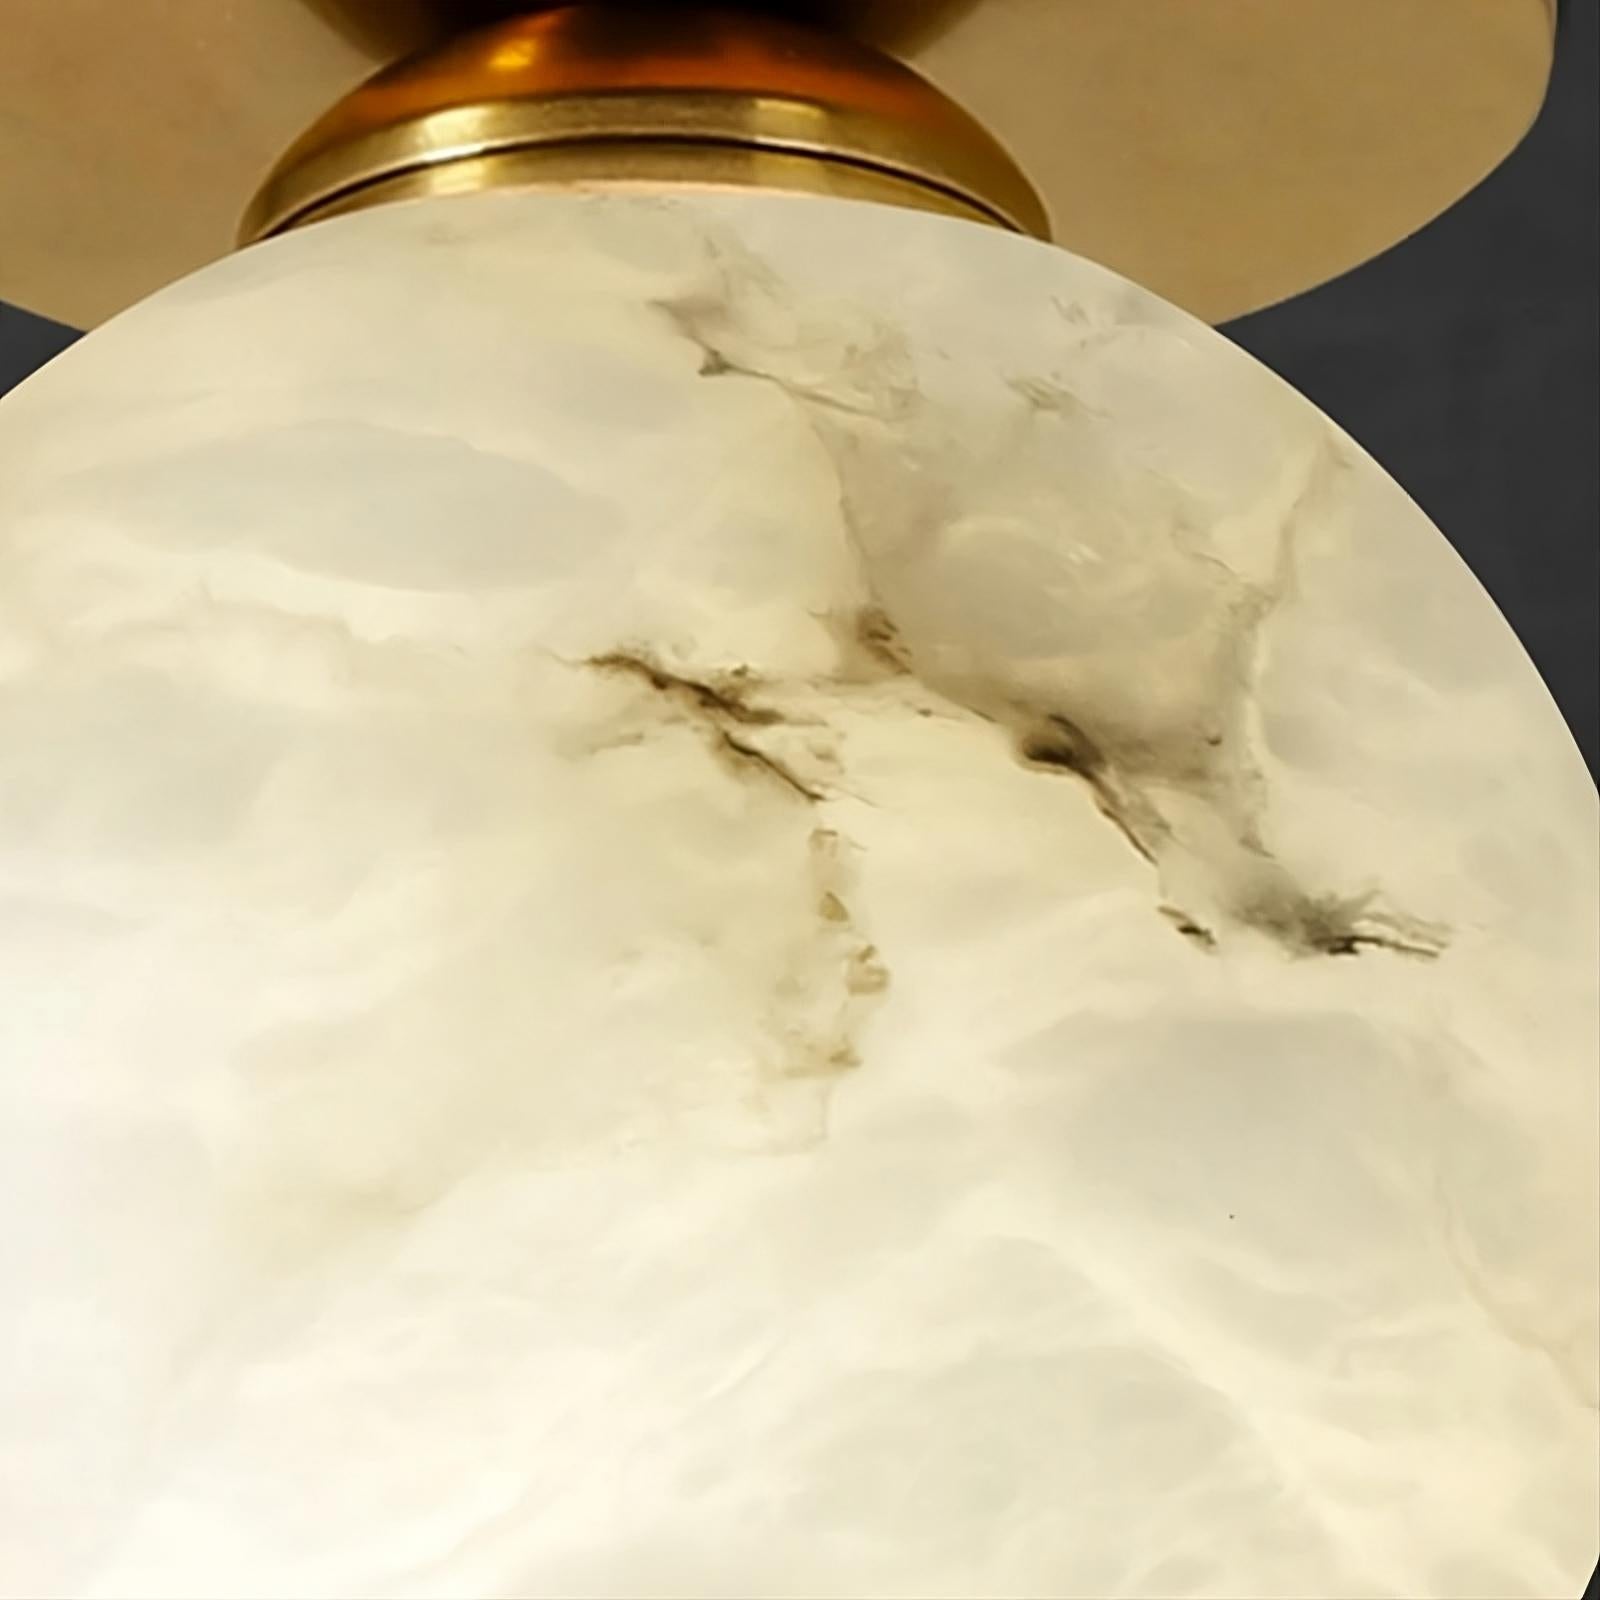 Close-up view of a Natural Marble Hallway Ceiling Light Fixture by Morsale.com with a marble-like white and beige pattern, attached to a brass-colored mounting. The surface texture has intricate, darker vein-like lines, reminiscent of Spanish marble.